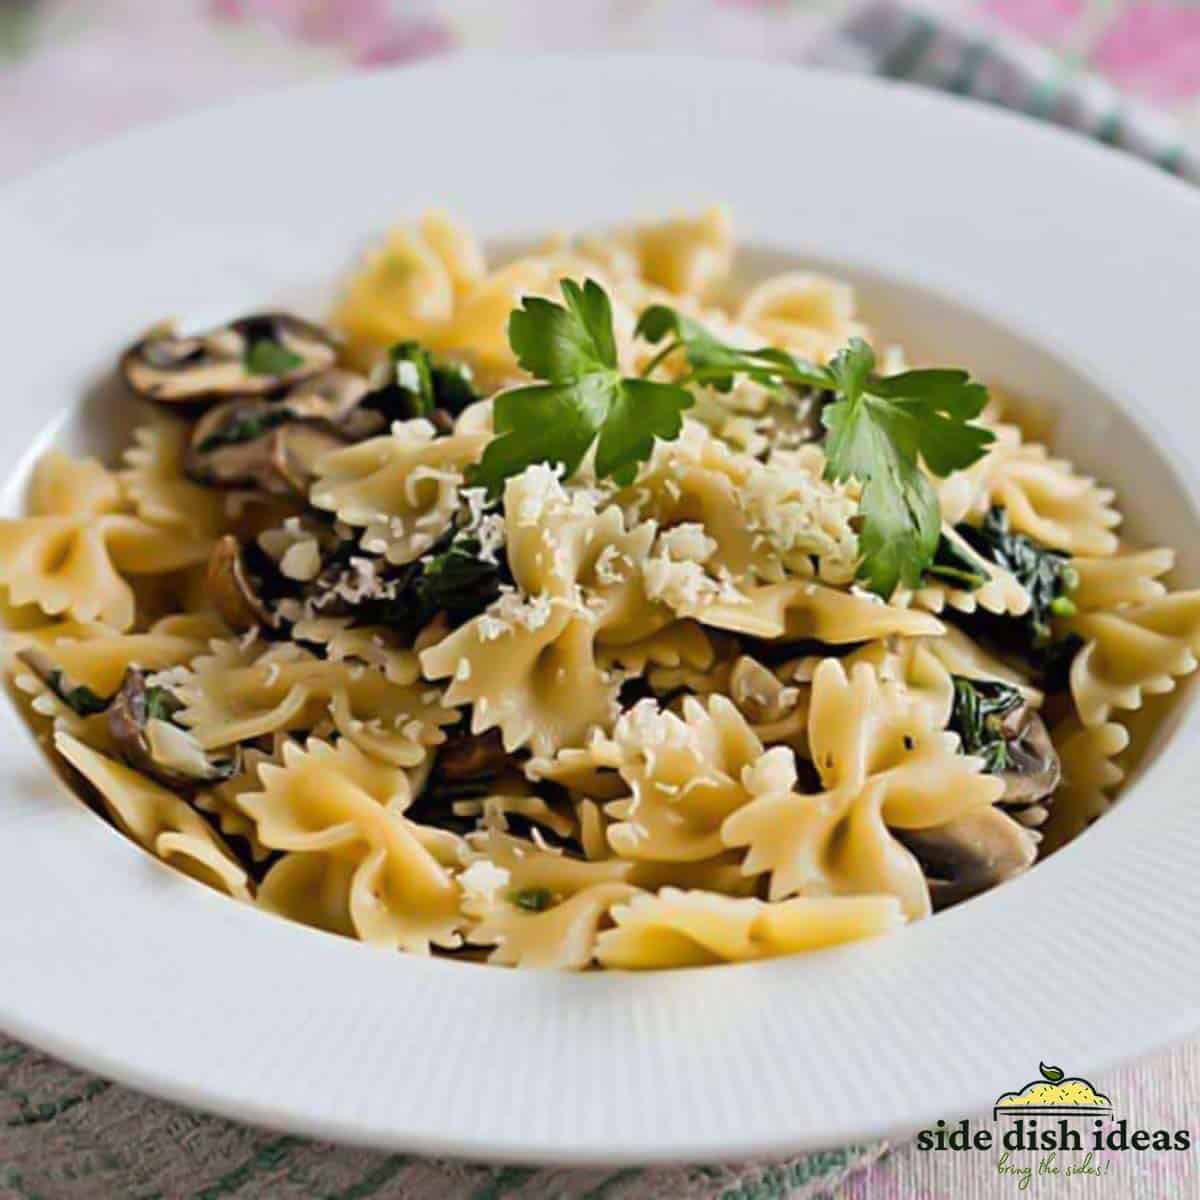 Pasta with spinach and mushrooms topped with parsley and cheese in a white deep plate